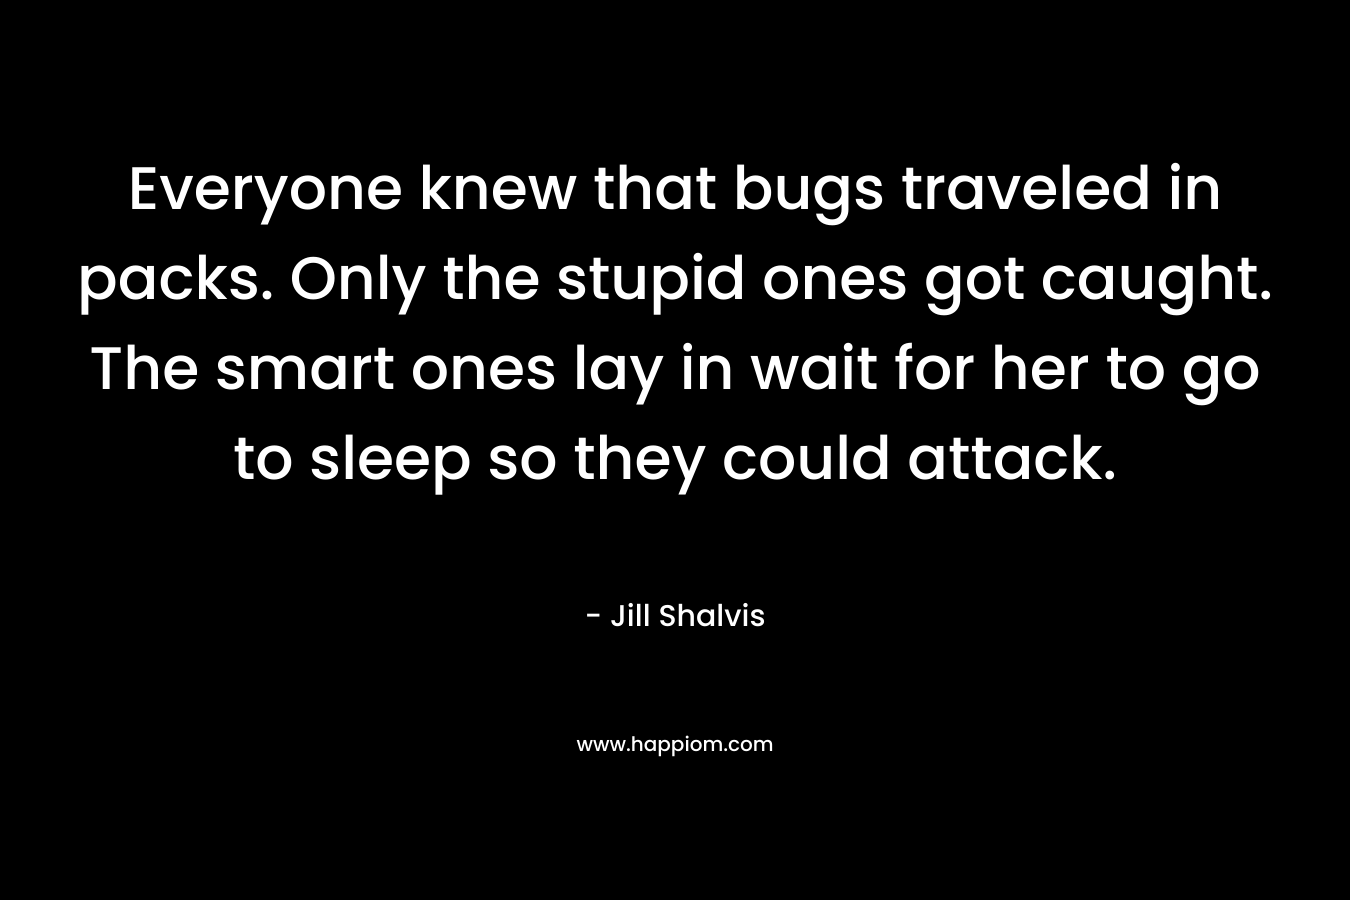 Everyone knew that bugs traveled in packs. Only the stupid ones got caught. The smart ones lay in wait for her to go to sleep so they could attack. – Jill Shalvis